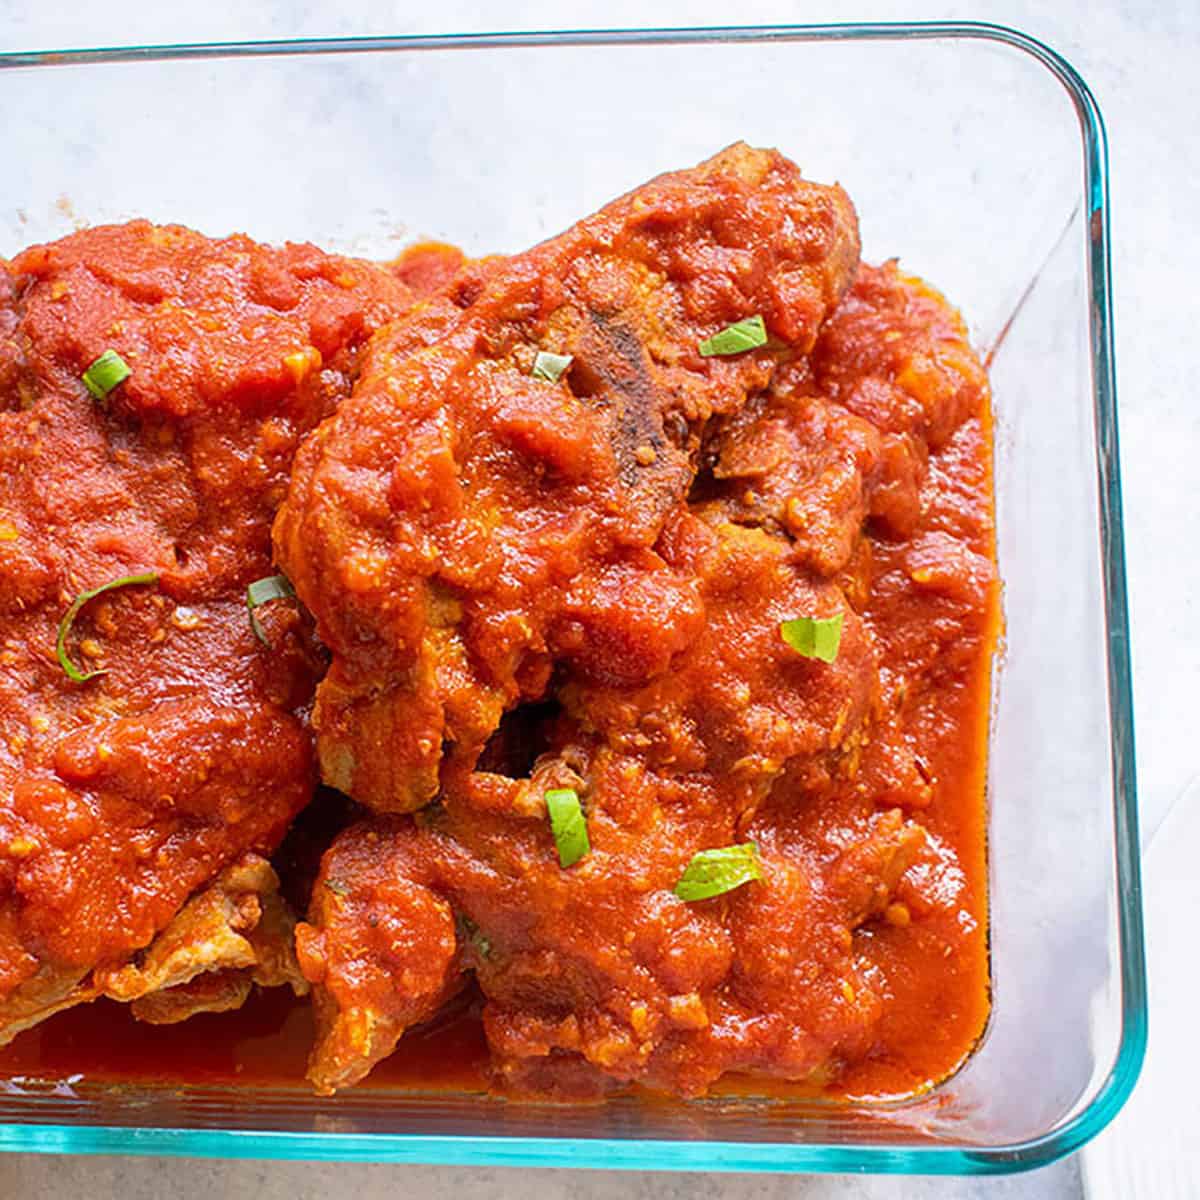 bowl of ribs with tomato sauce